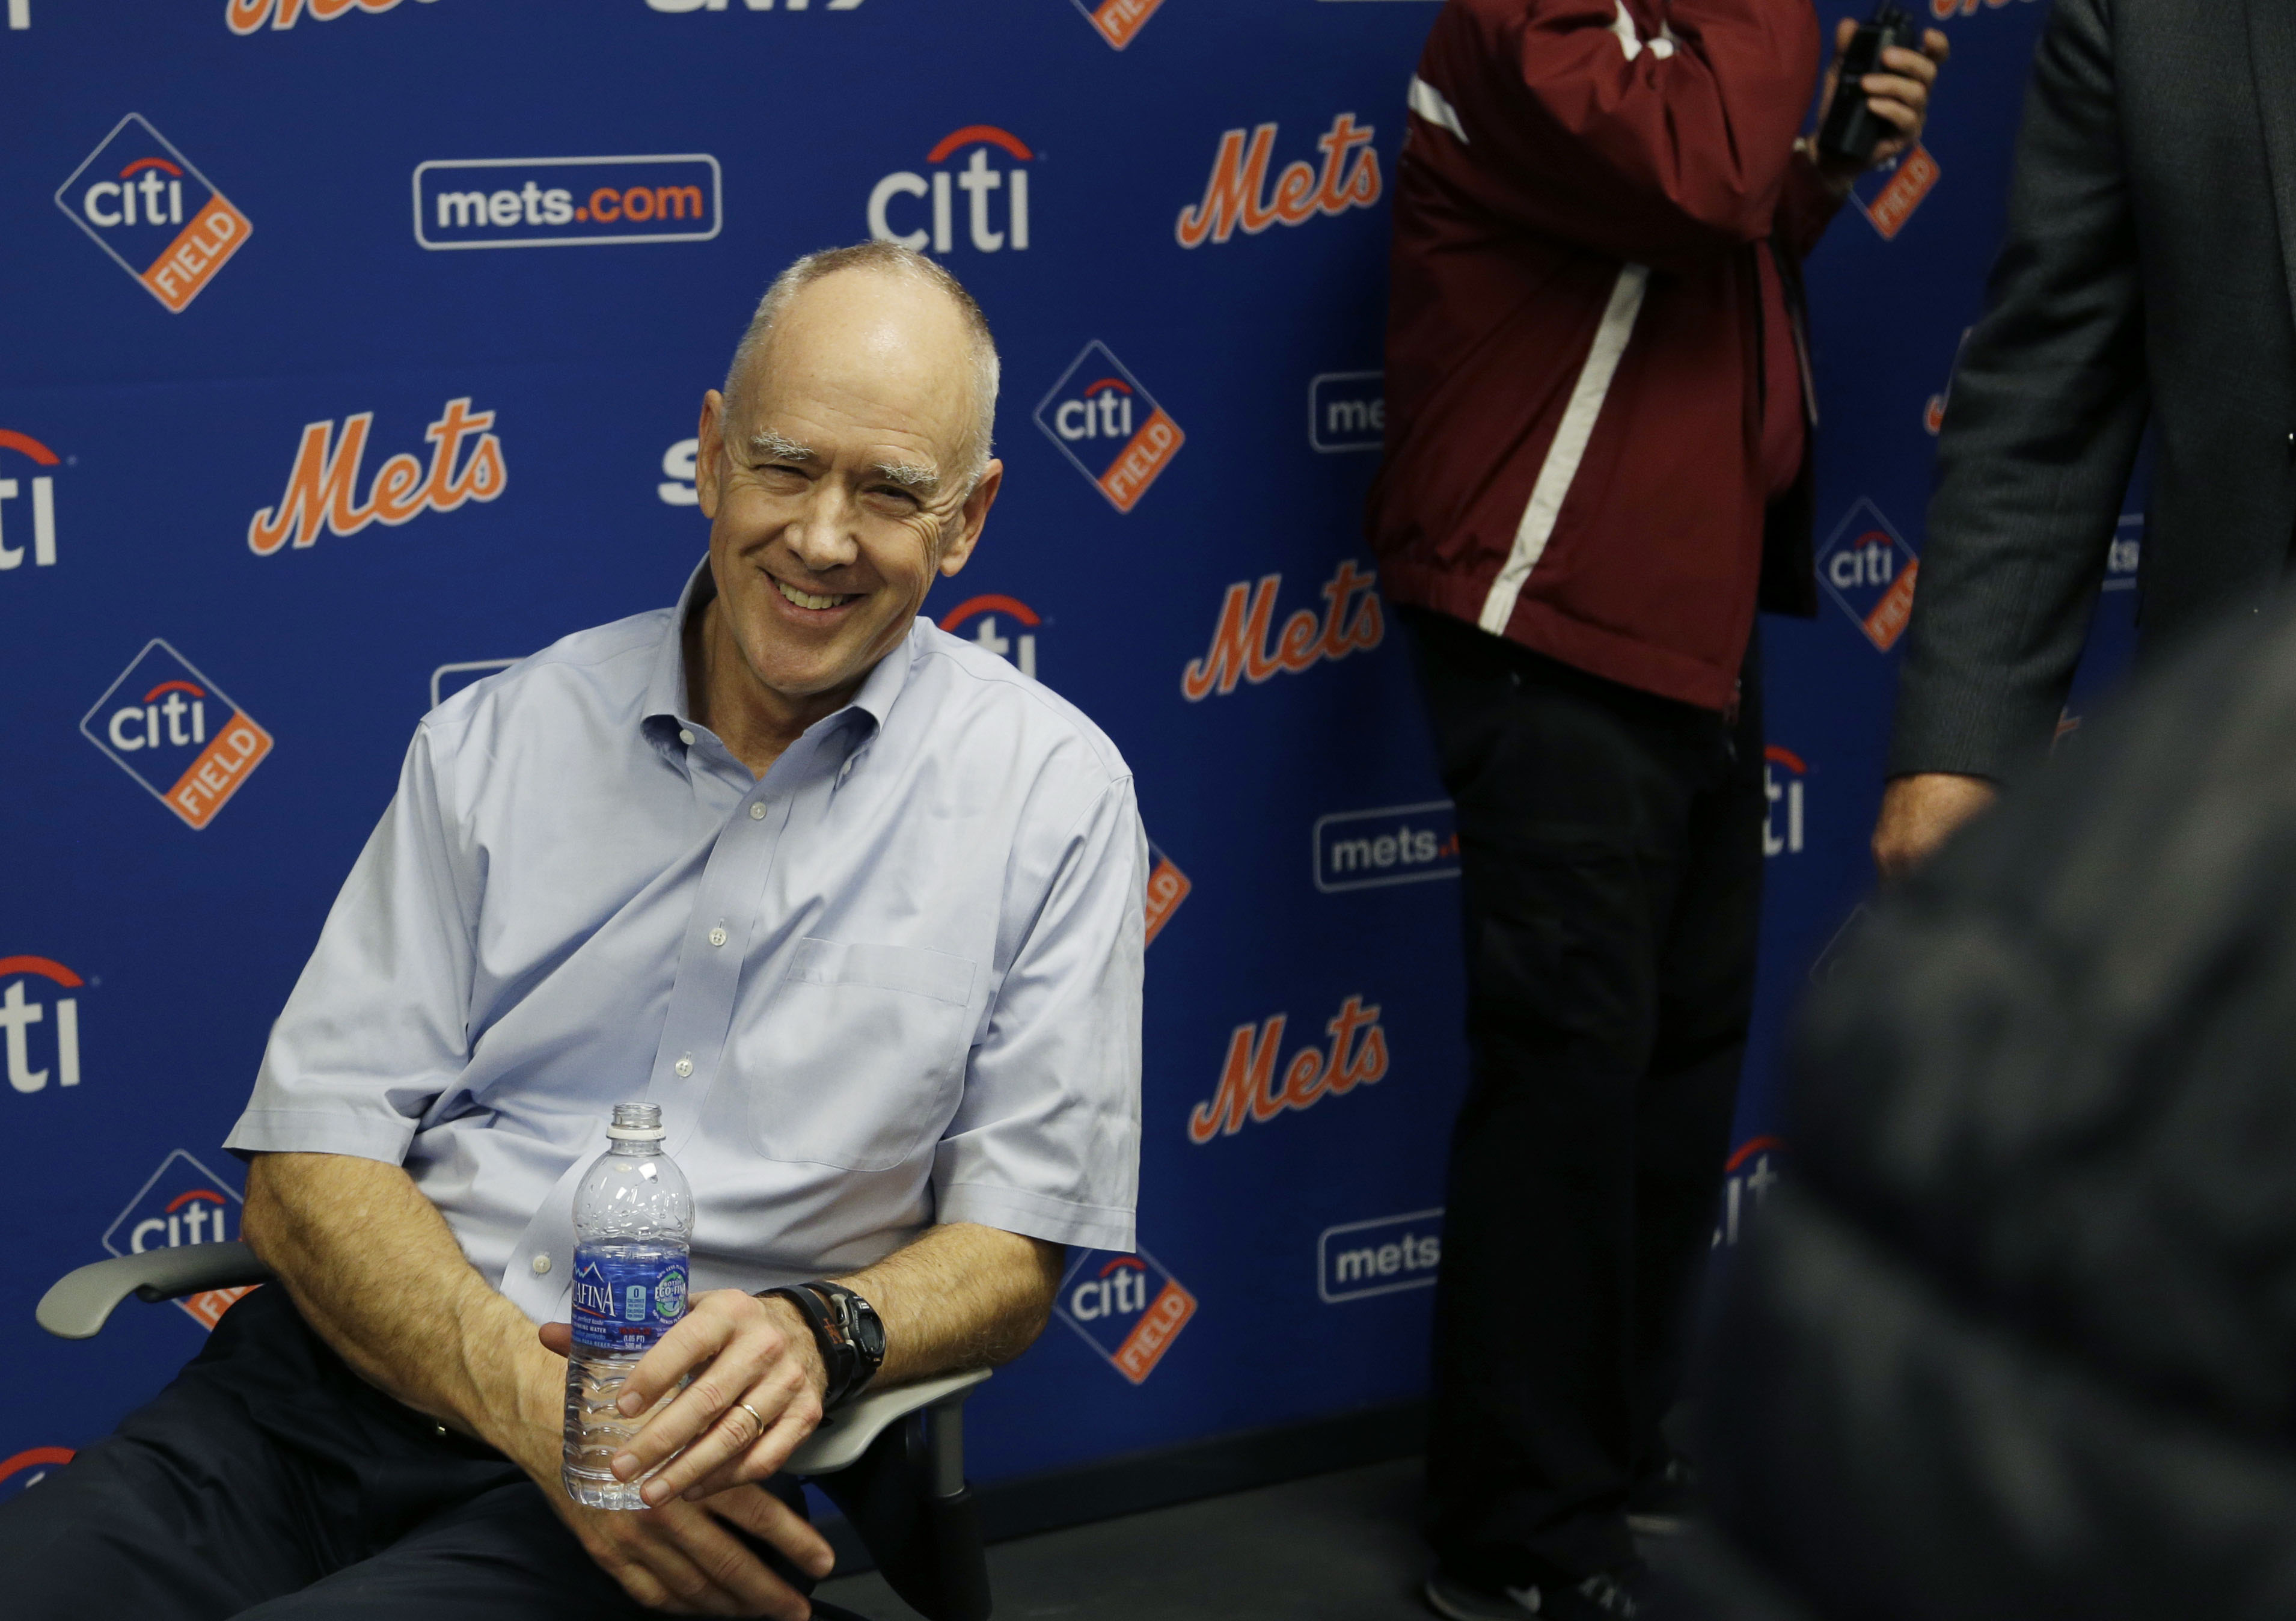 New York Mets general manger Sandy Alderson rests in a chair after collapsing during a news conference in New York, Wednesday, Nov. 4, 2015. (AP Photo/Seth Wenig)